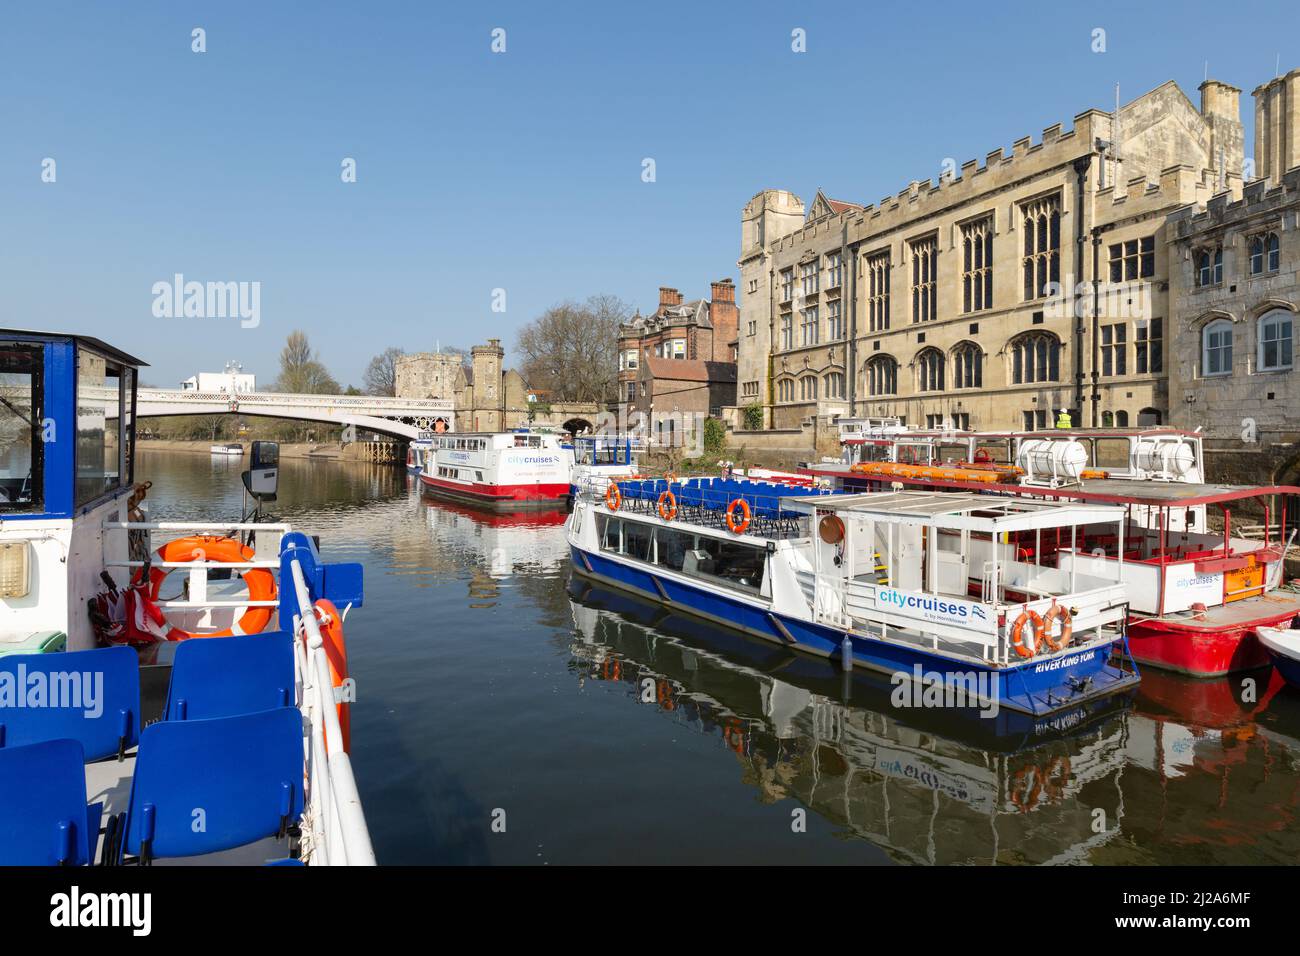 Site seeing cruise on River Ouse, York, with Lendal Bridge Built 1861, in distance. Stock Photo